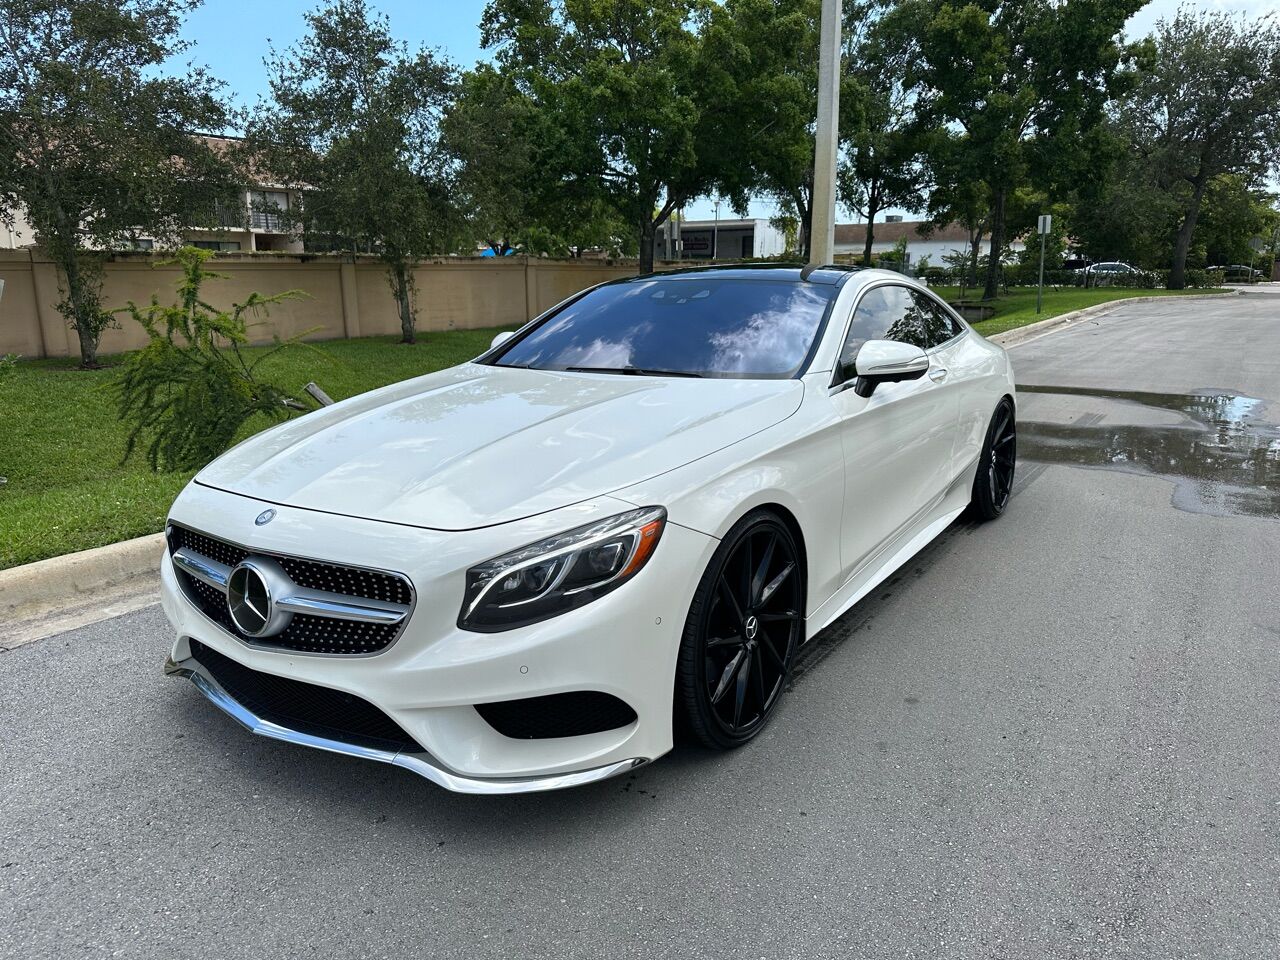 2015 Mercedes-Benz S-Class Coupe - $42,999